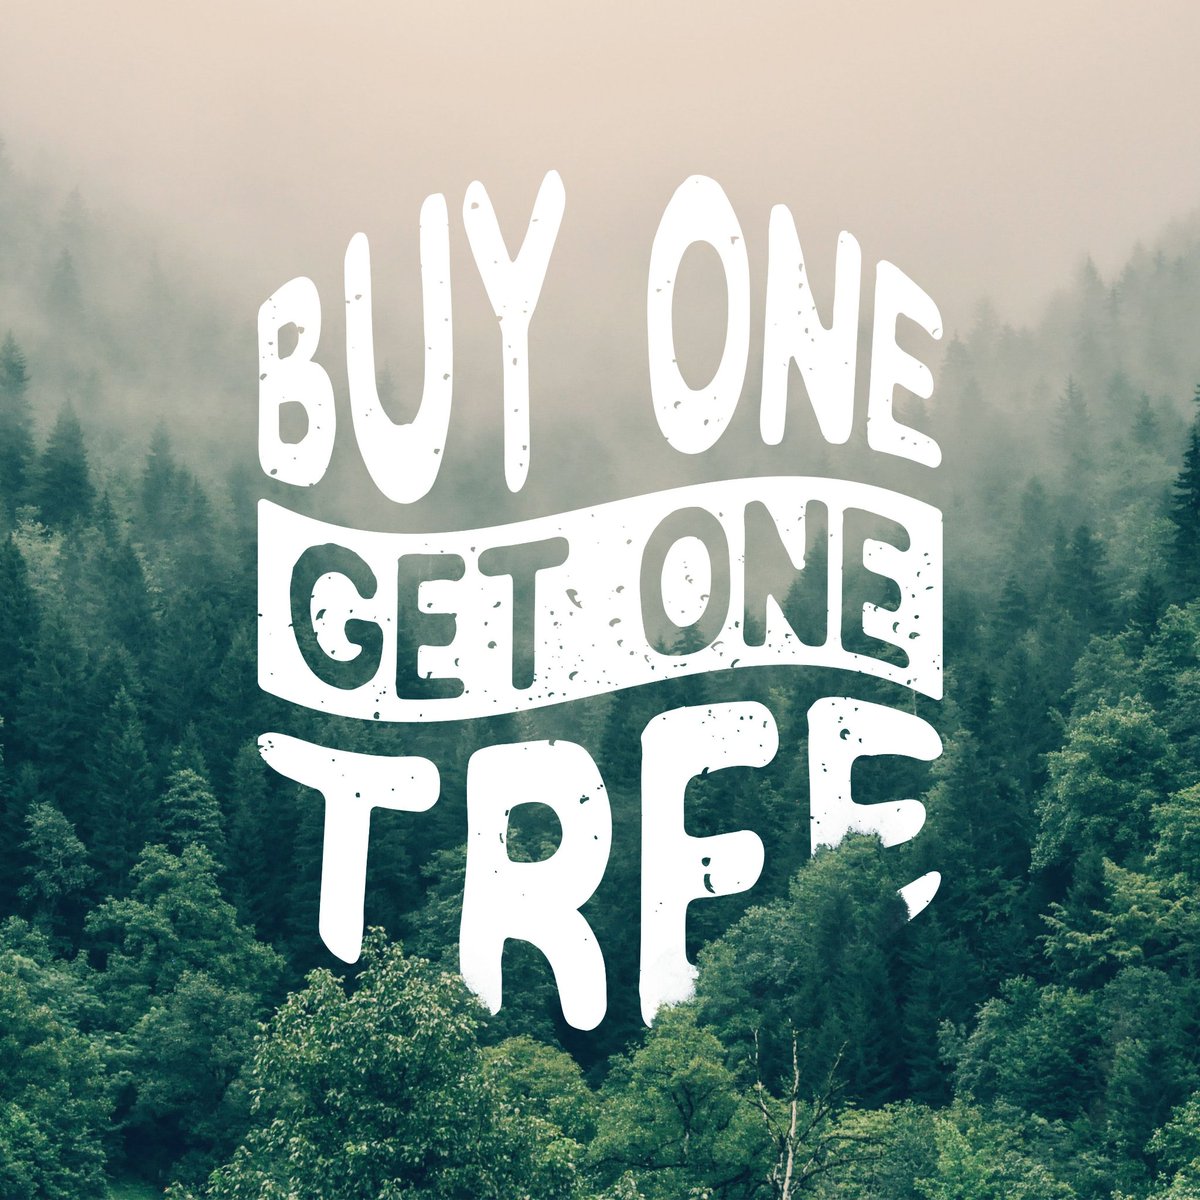 Buy One, Get One Tree!

For every order at ethicallyqueer.com this weekend a tree will be planted. 9am Friday til Midnight Sunday.

#trees #buyonegetonetree #sustainabilitygoals #sustainable #recycle #renewables